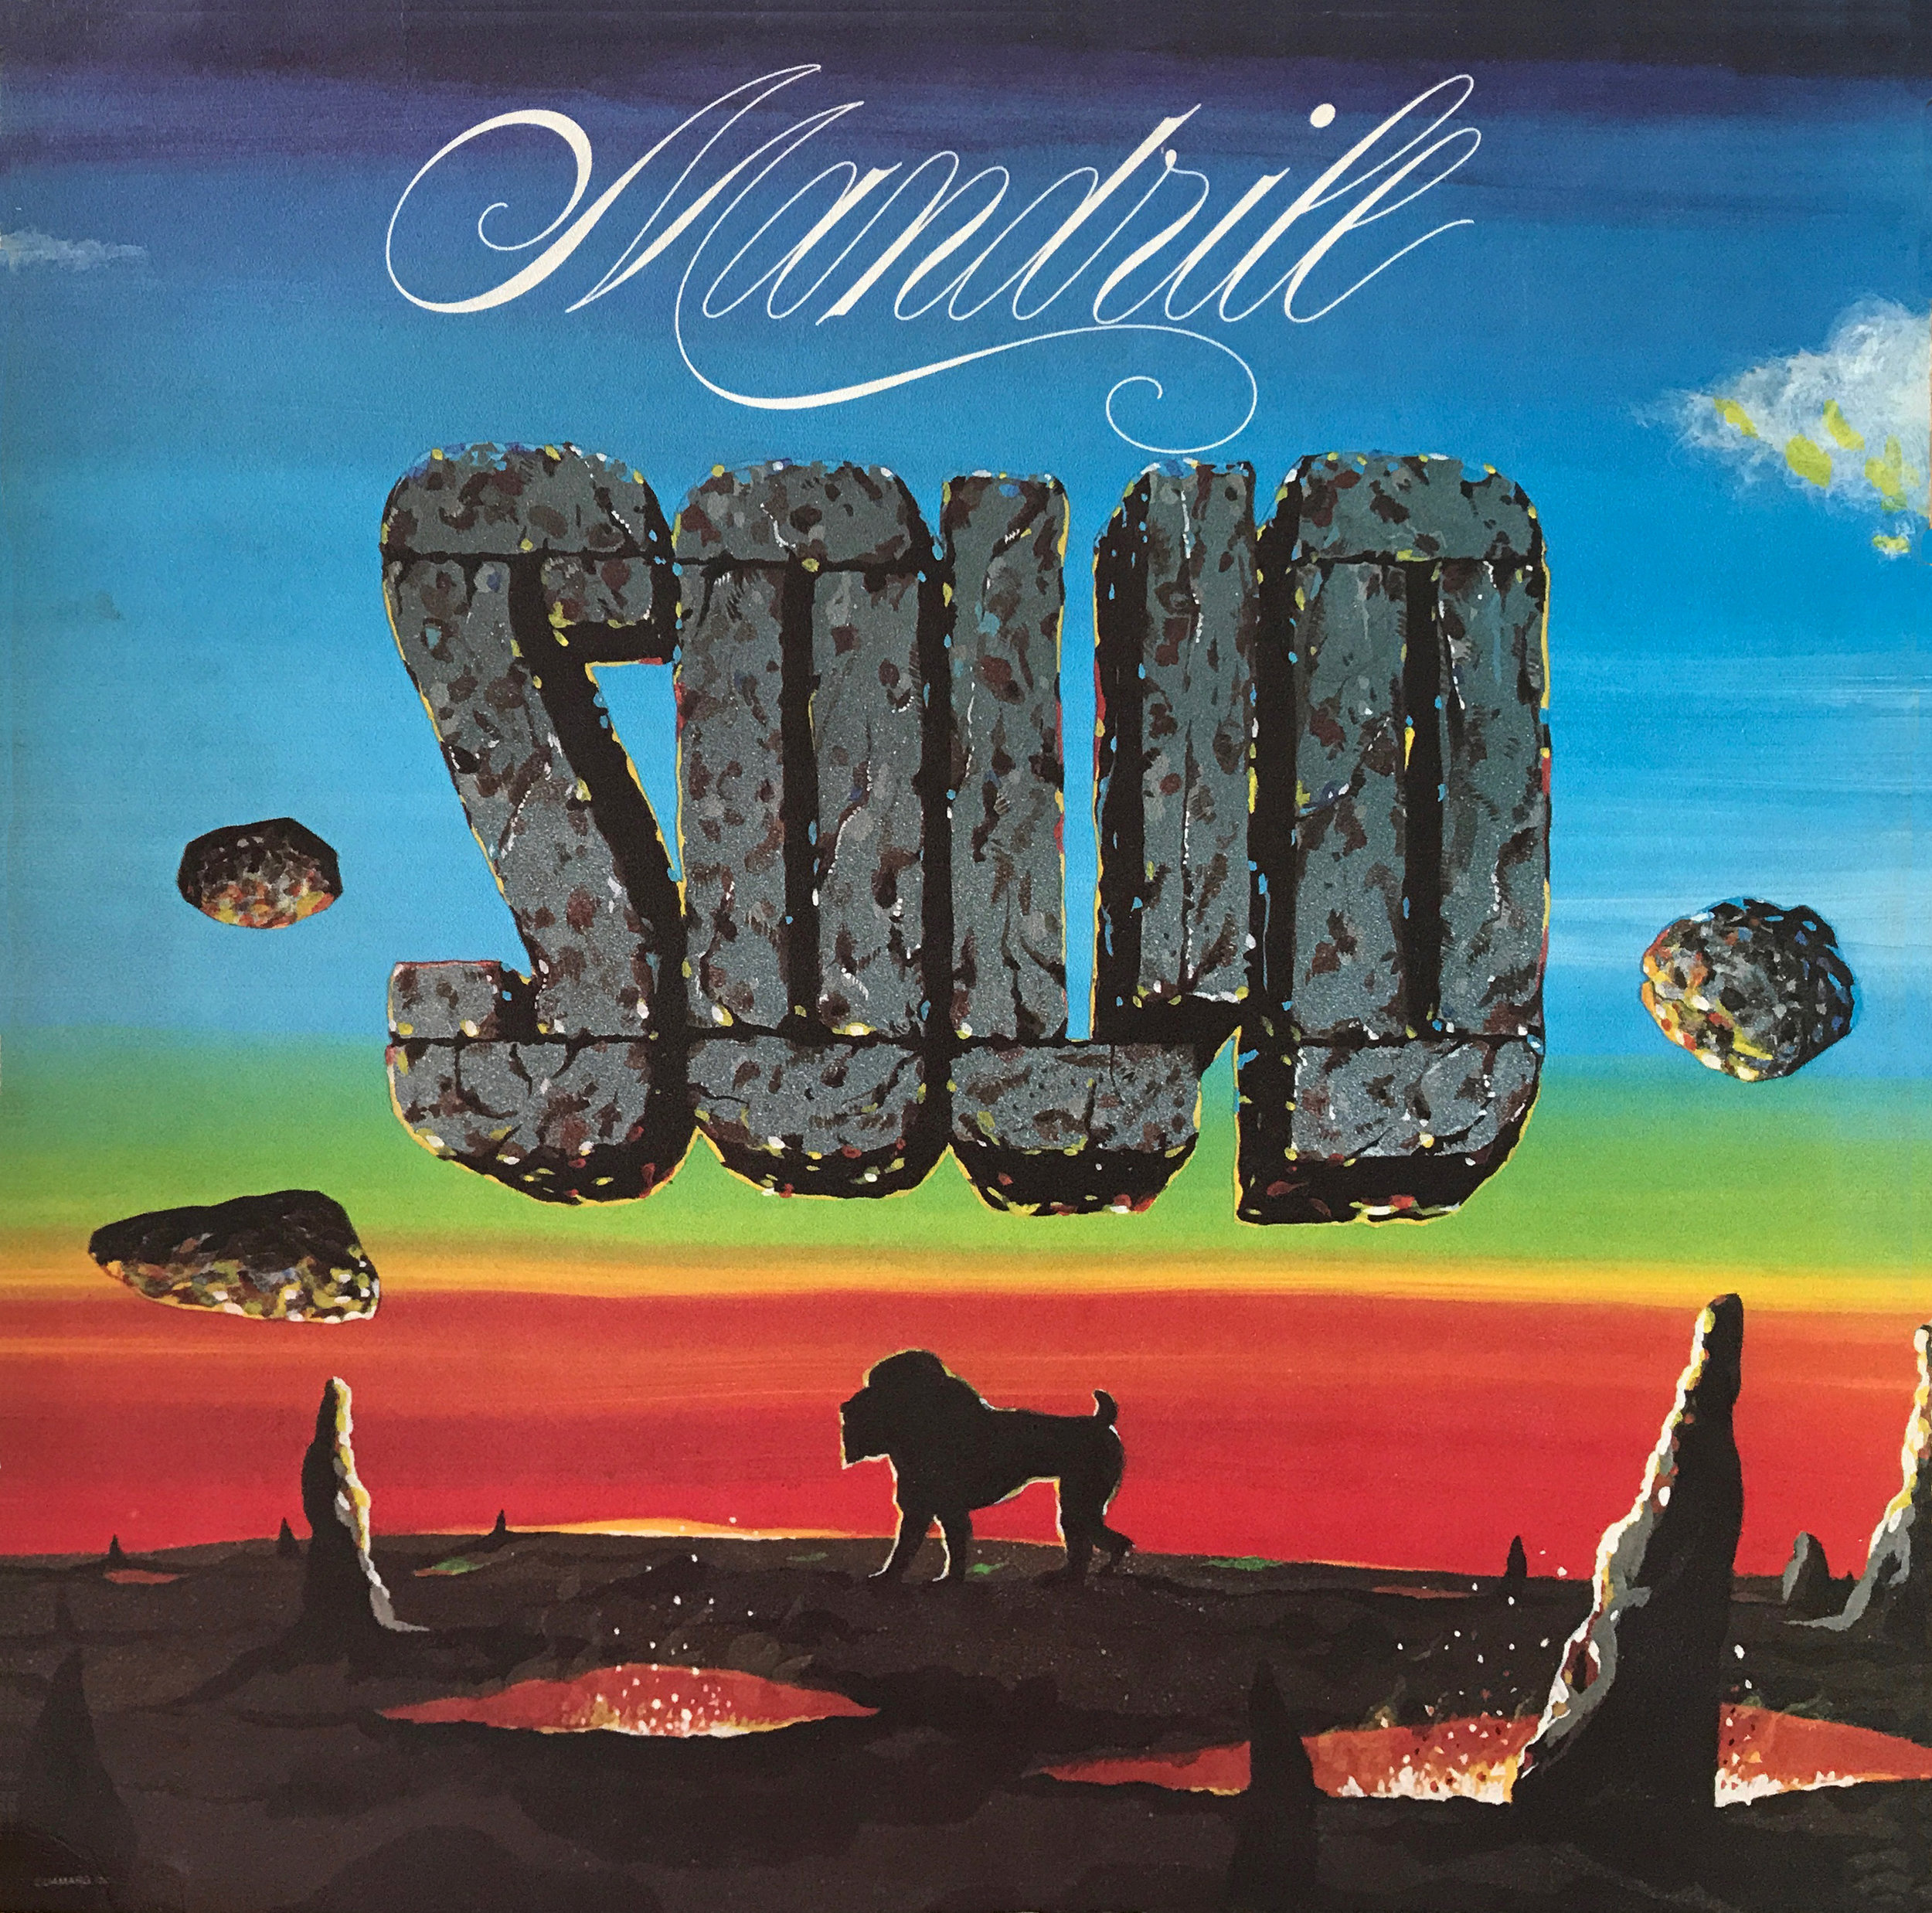 Solid (1975)